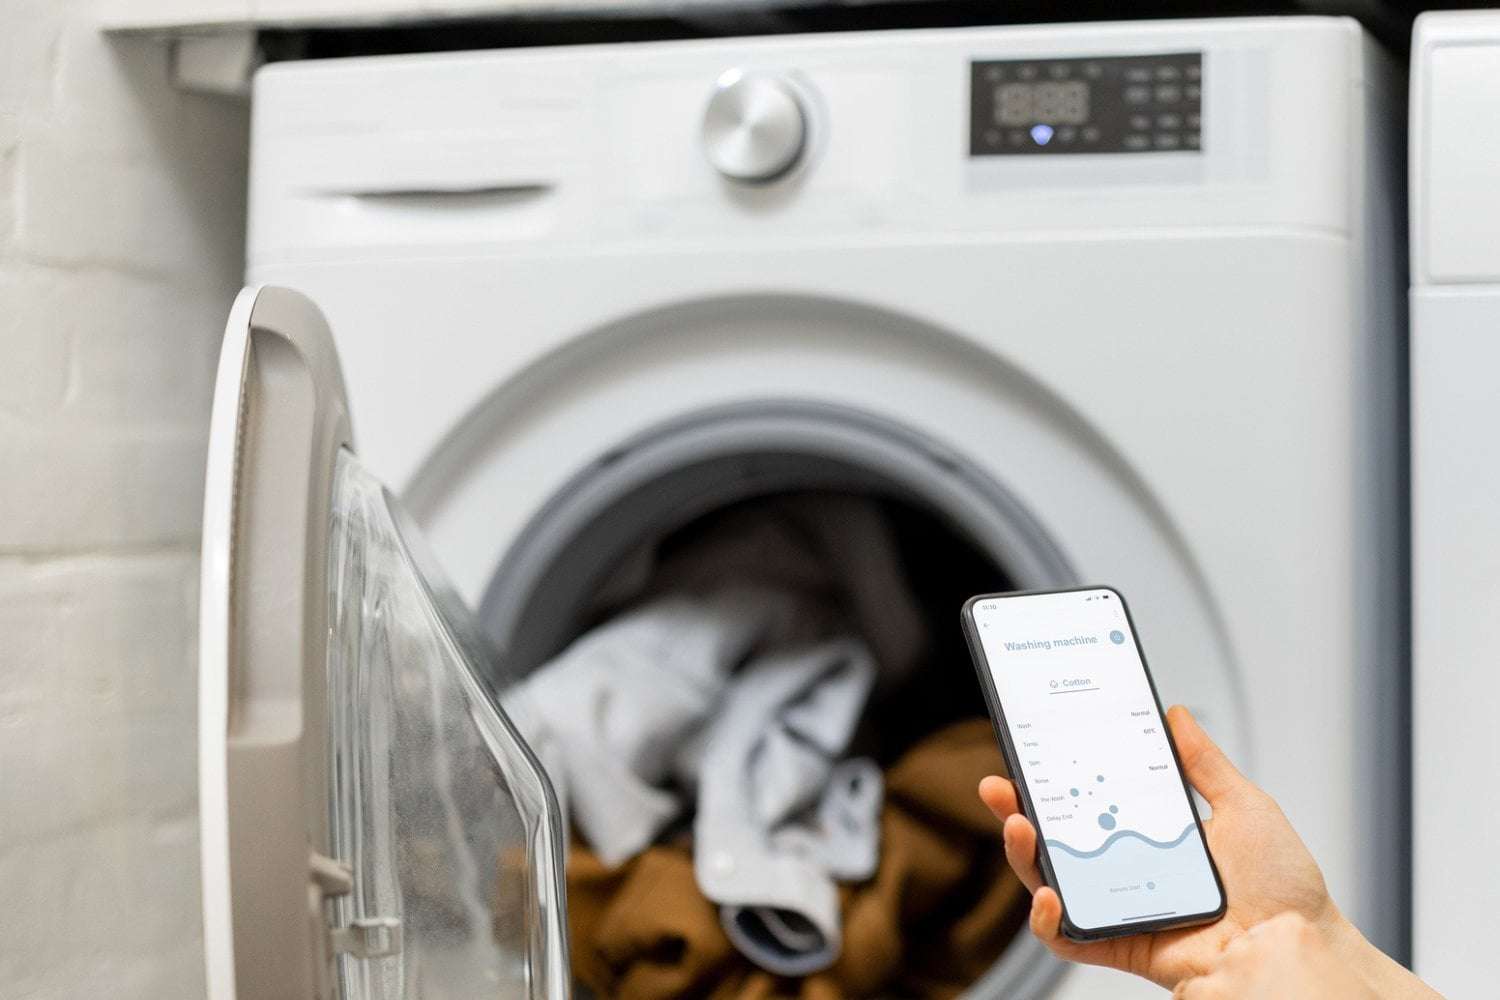 image for Homeowner Baffled After Washing Machine Uses 3.6GB of Internet Data a Day